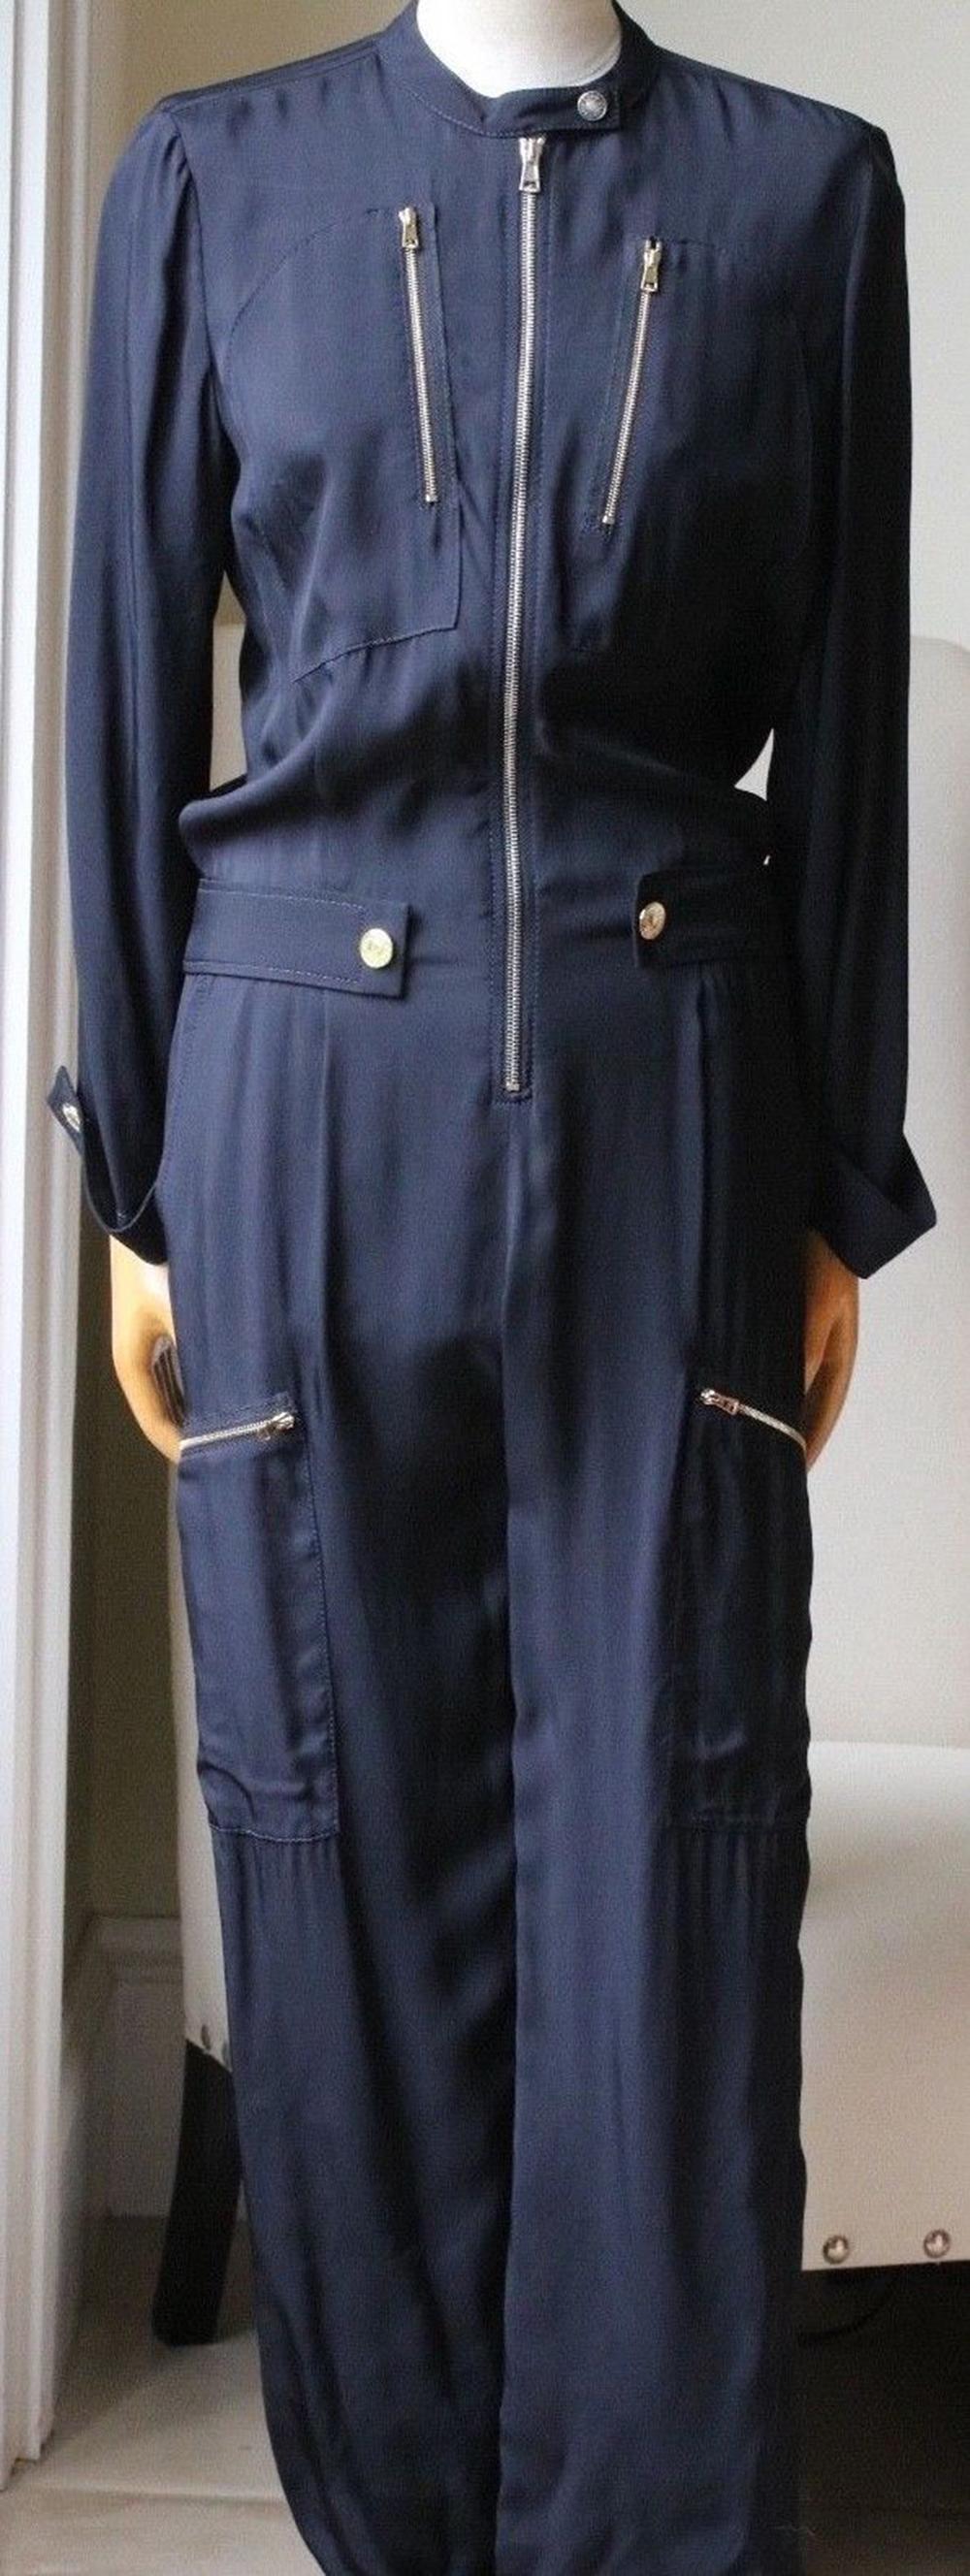 Navy blue silk blend zip front jumpsuit from Chloé featuring a band collar, a press stud fastening, front zipped pockets, long sleeves, button cuffs, a straight leg, side zipped pockets to the legs. 100% Viscose. Contrast: 70% acetate, 3%